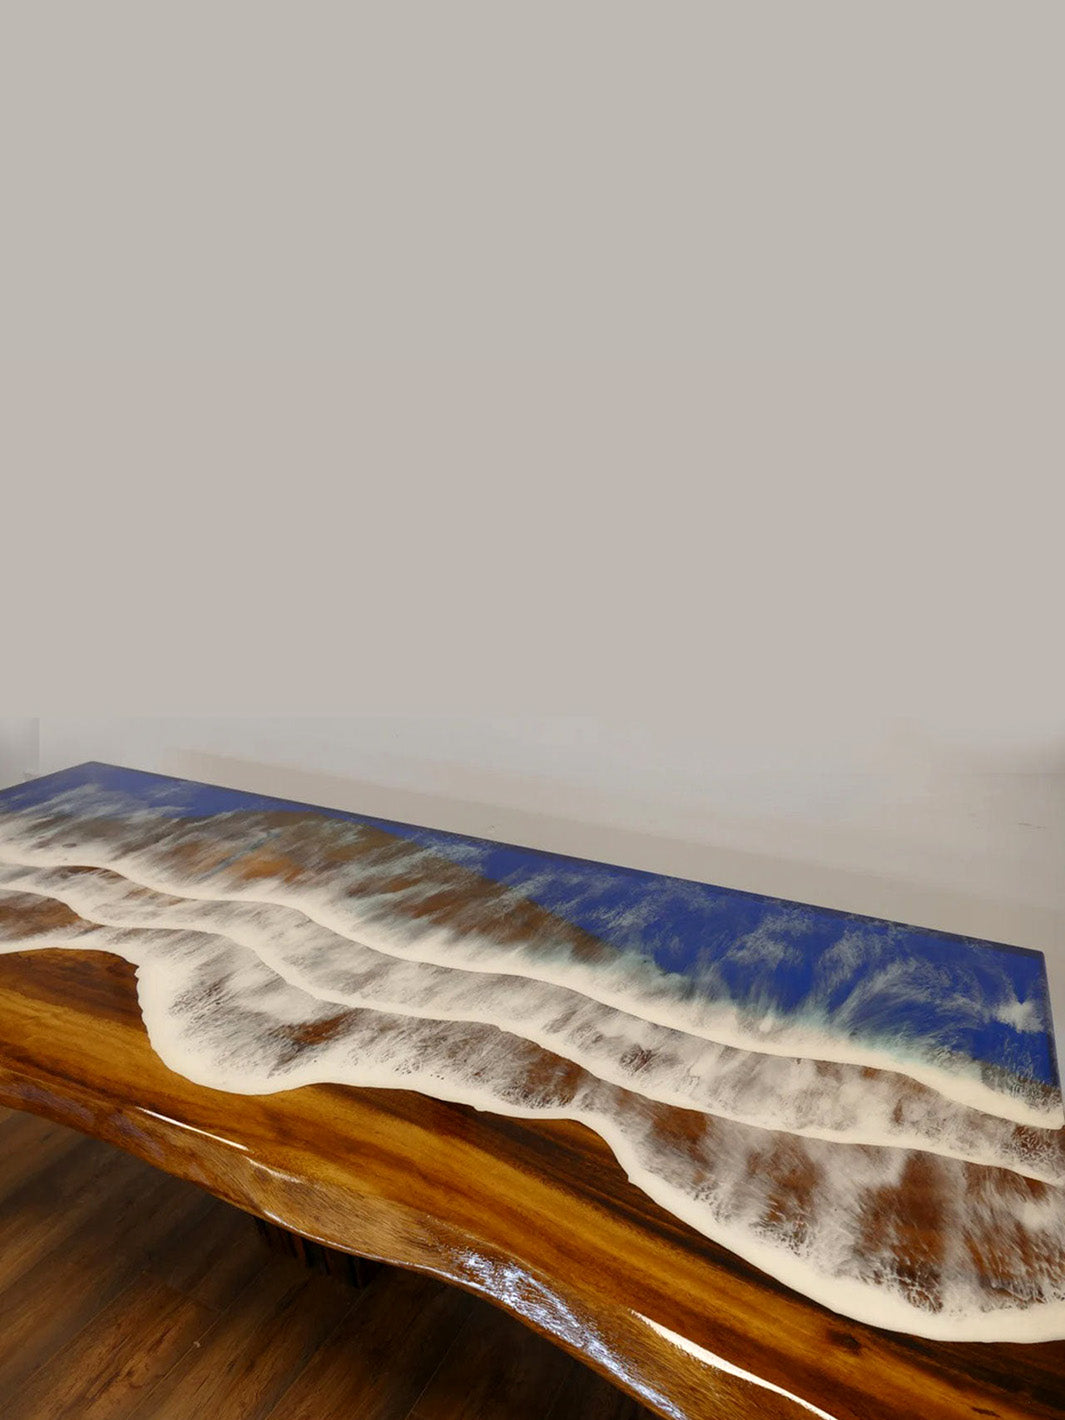 Handcrafted River Beach Epoxy Resin Wooden Dining Table | 180x80cm Made 4 Decor Tables MDR0011-2